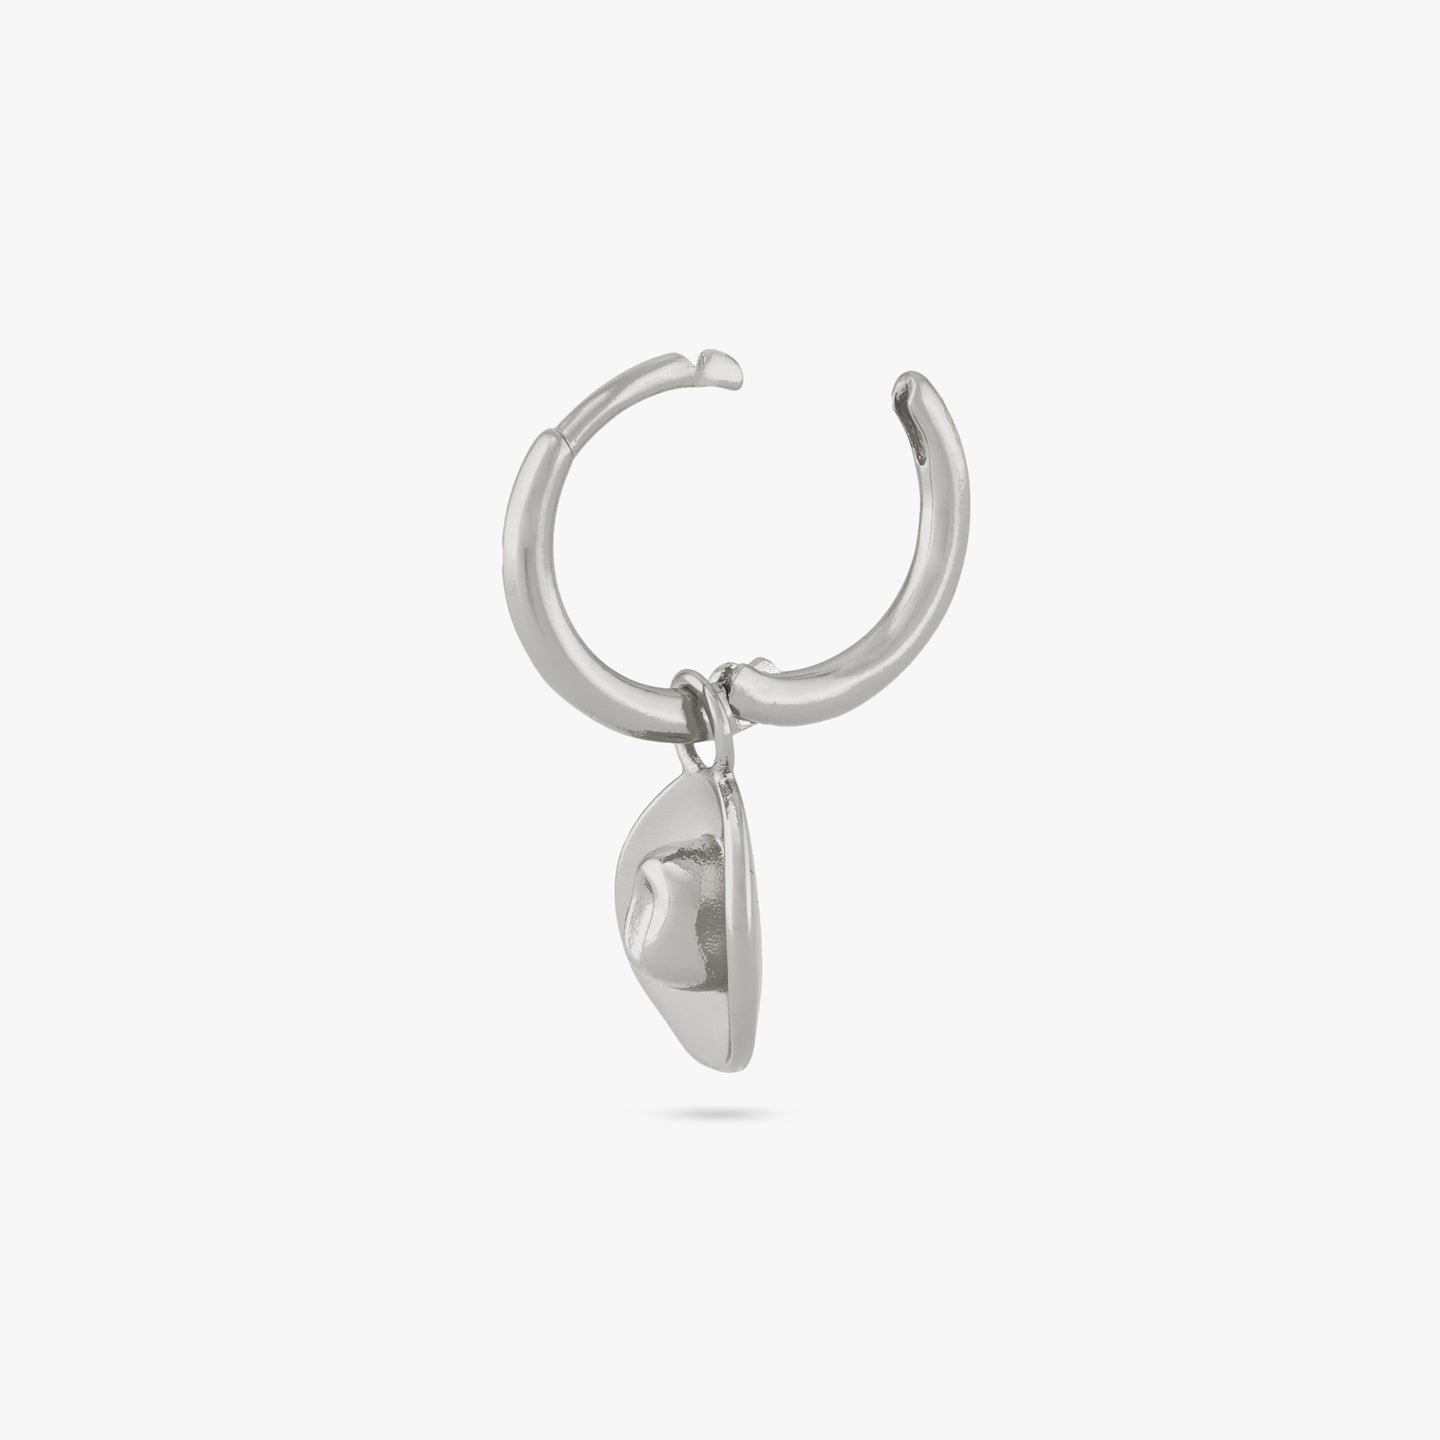 A small silver huggie with a cowboy hat charm with the clasp open color:null|silver